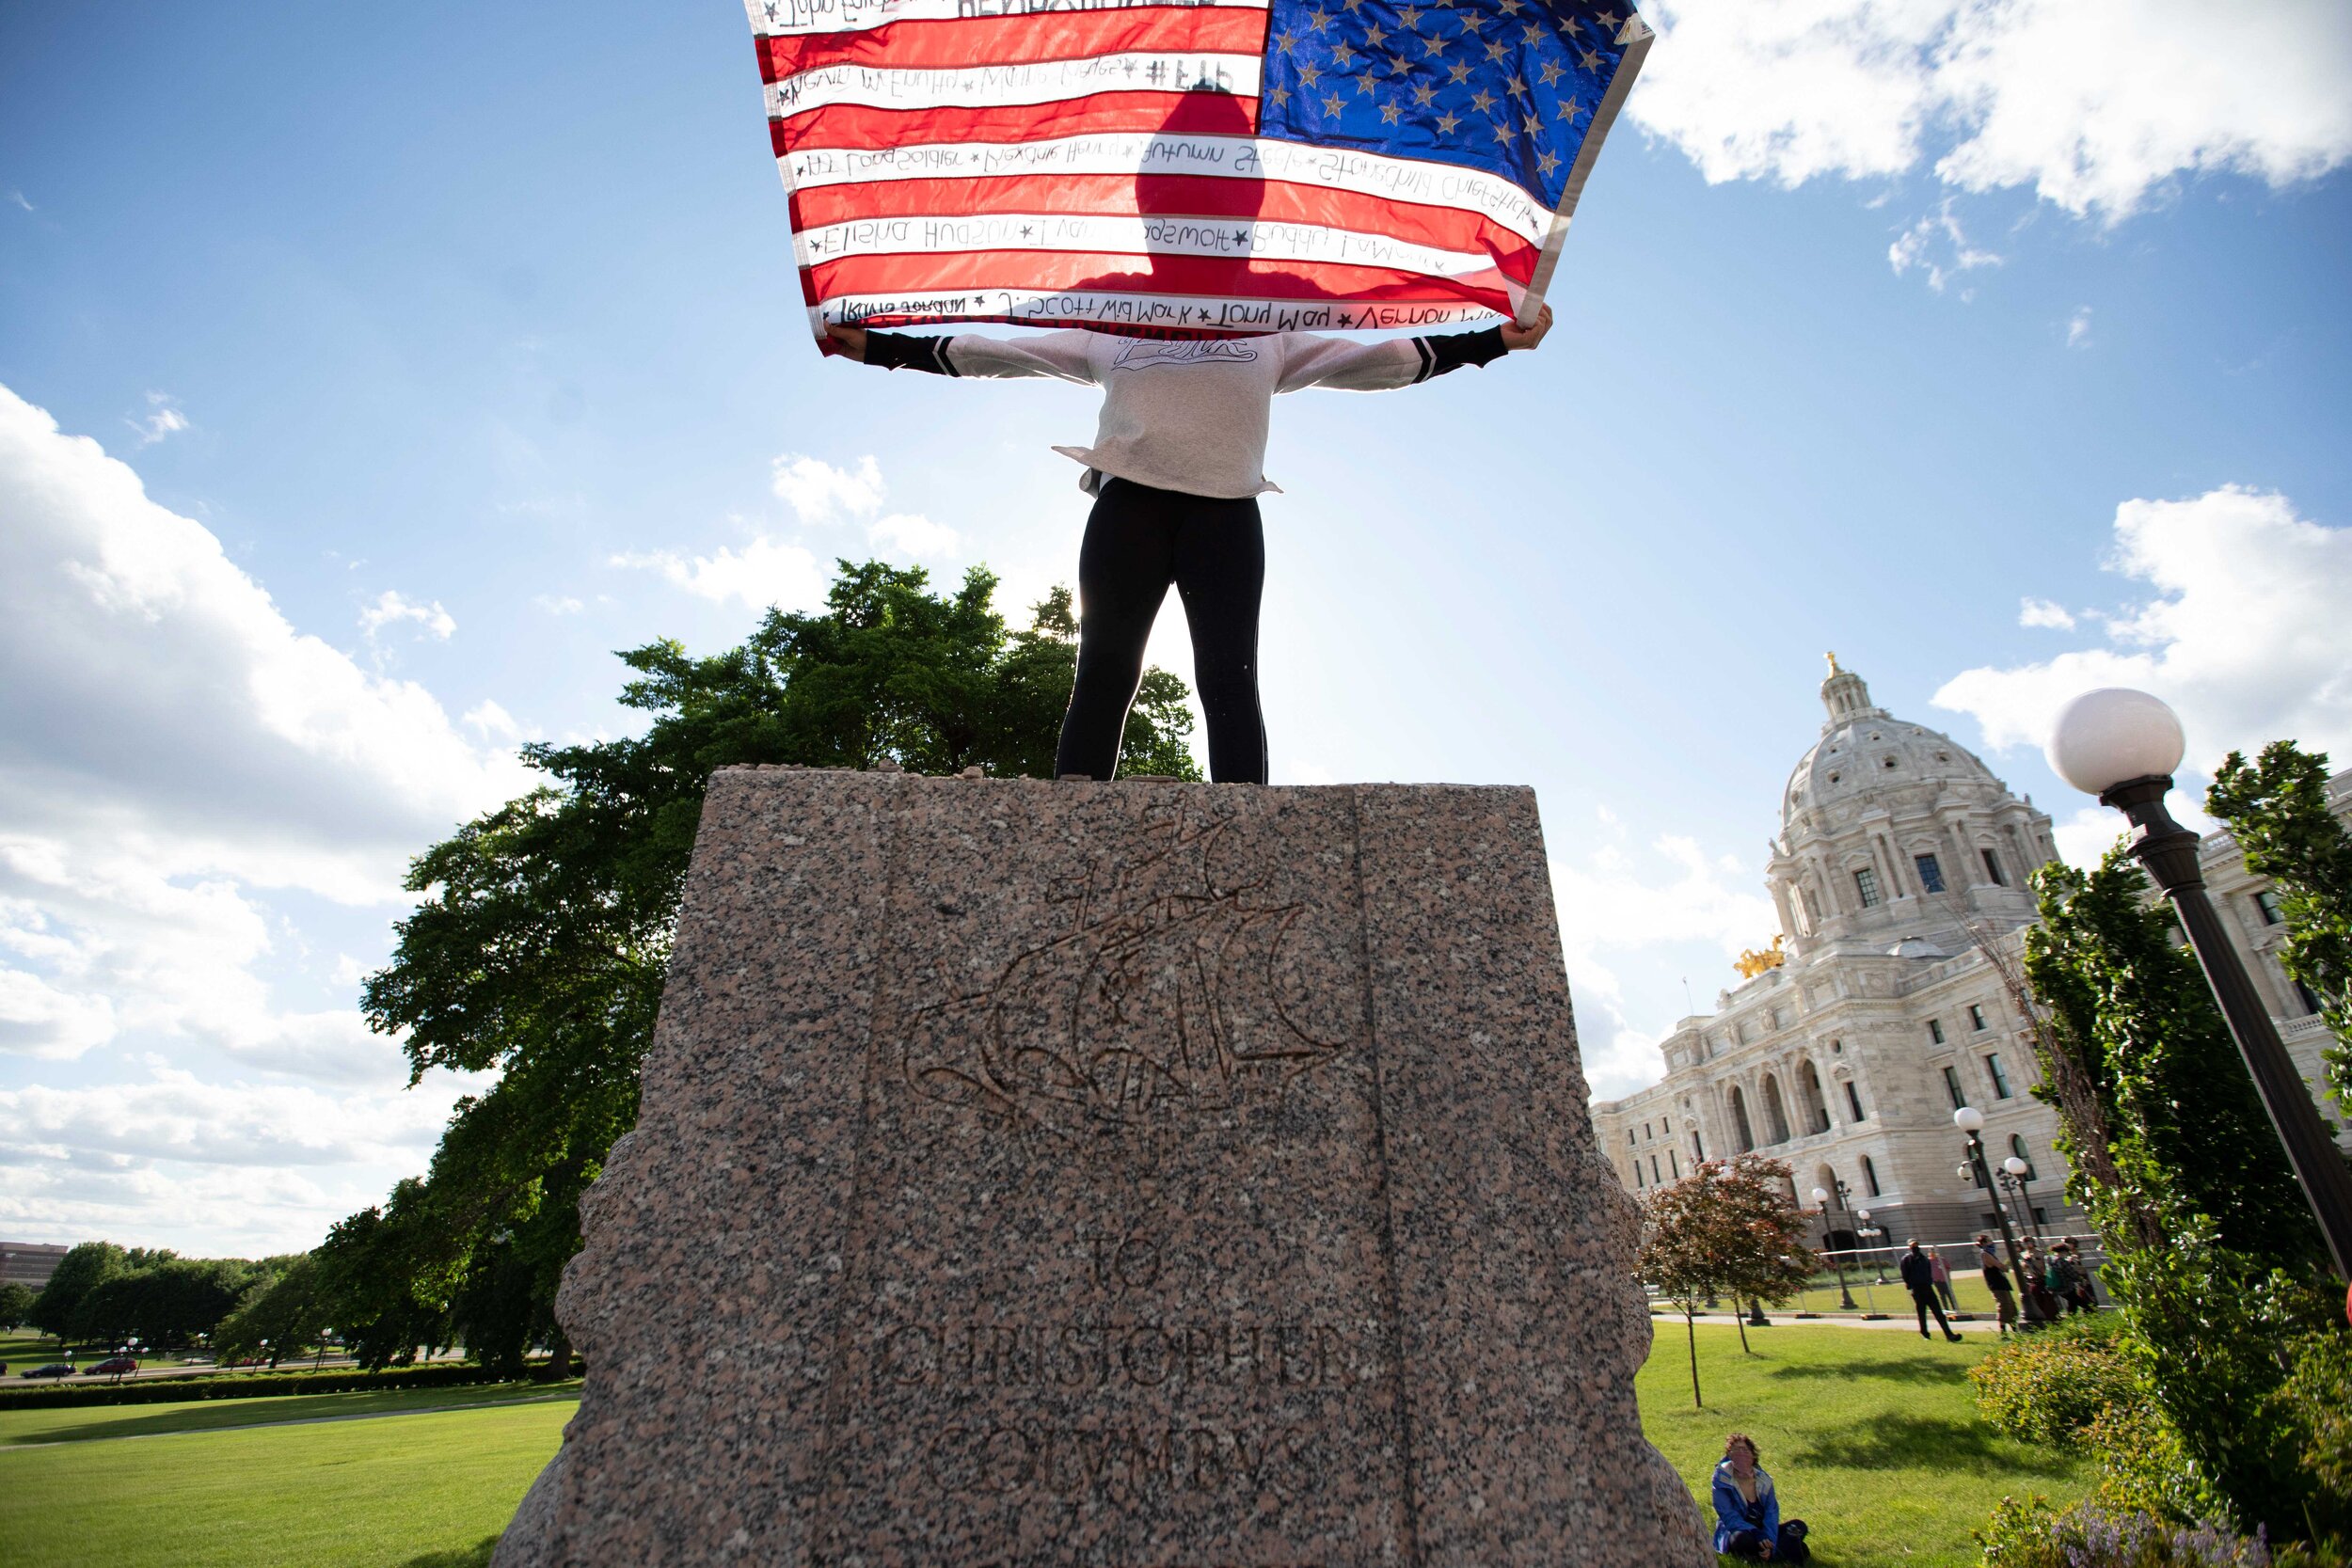  Holding a flag up, an activist stands where the Christopher Columbus statue stood minutes earlier before it was torn down in Saint Paul, Minnesota on Jun 10, 2020. 